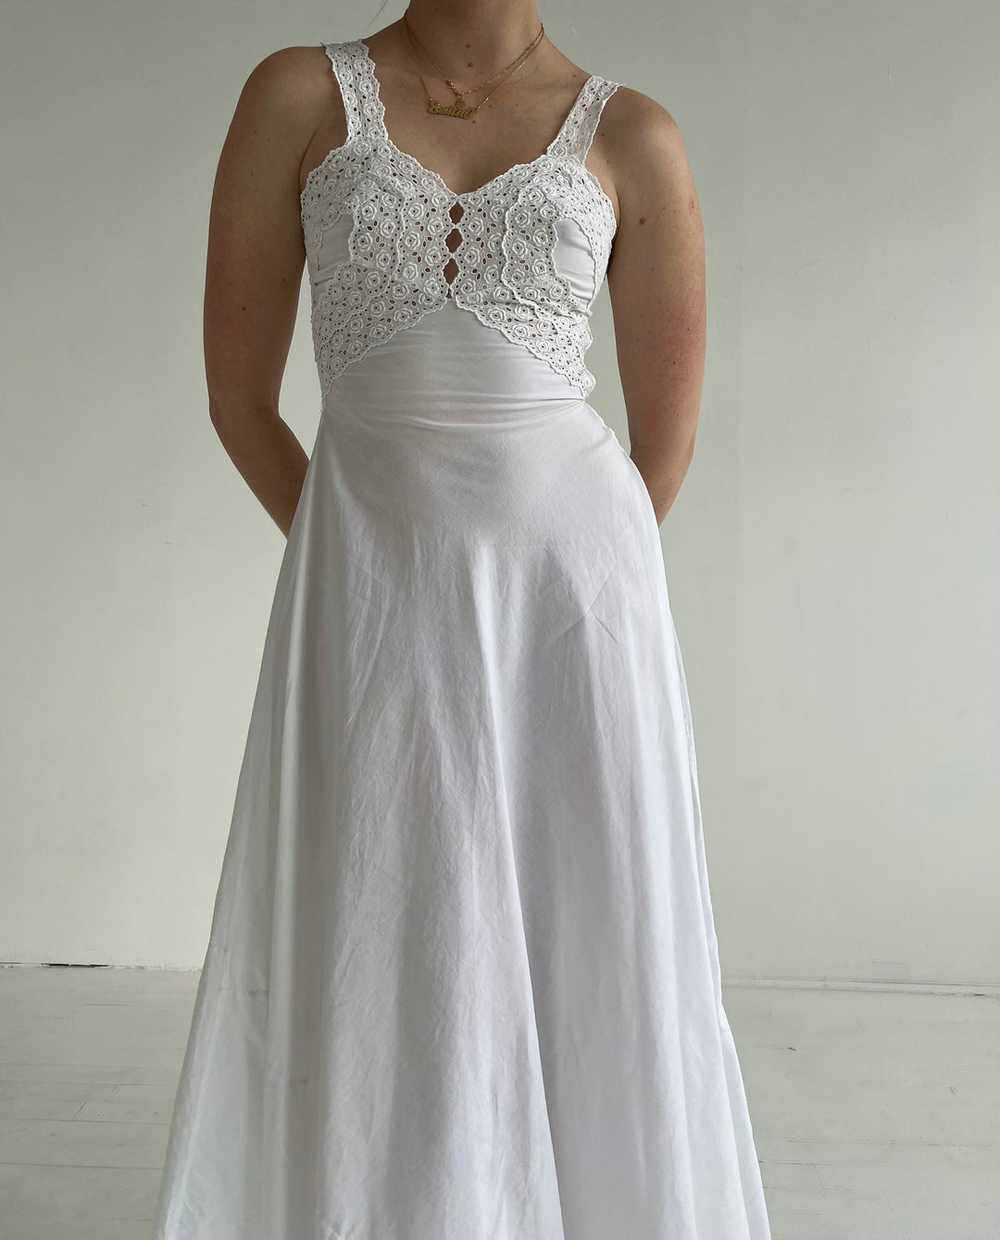 1970's Bridal White Cotton Dress with Lace - image 4